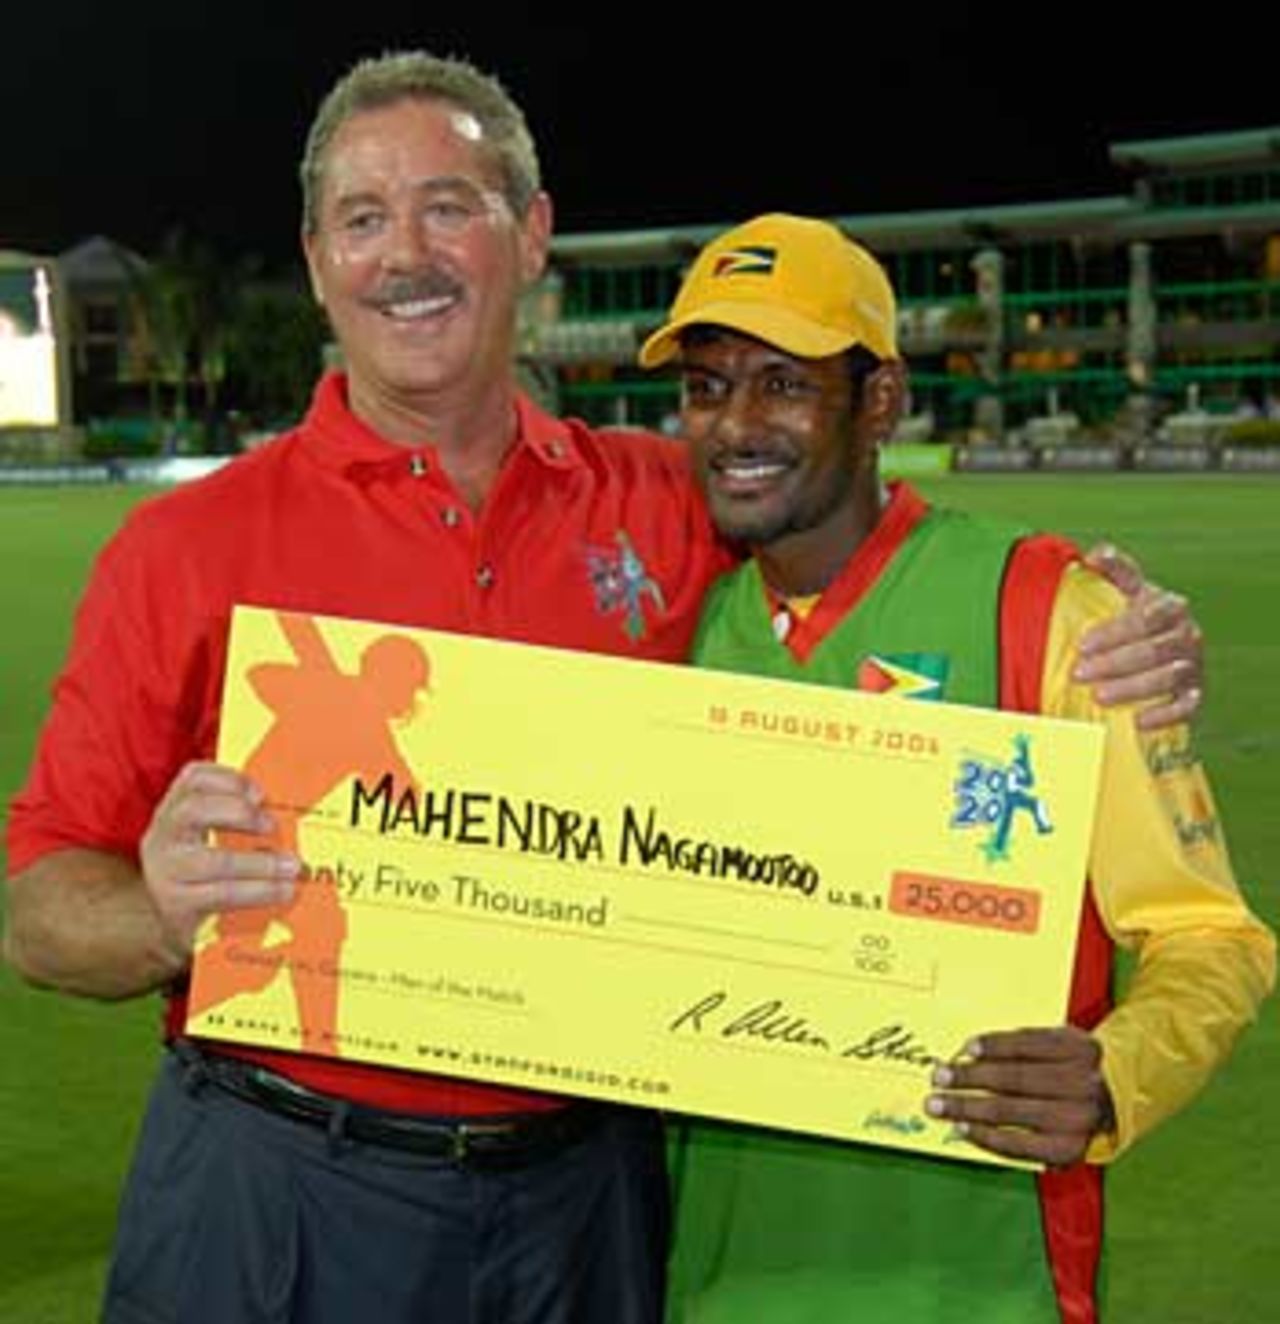 In the money... Mahendra Nagamootoo accepts the Man of the Match award cheque from Allen Stanford, Grenada v Guyana, Stanford 20/20, 1st semi-final, 10 August 2006

